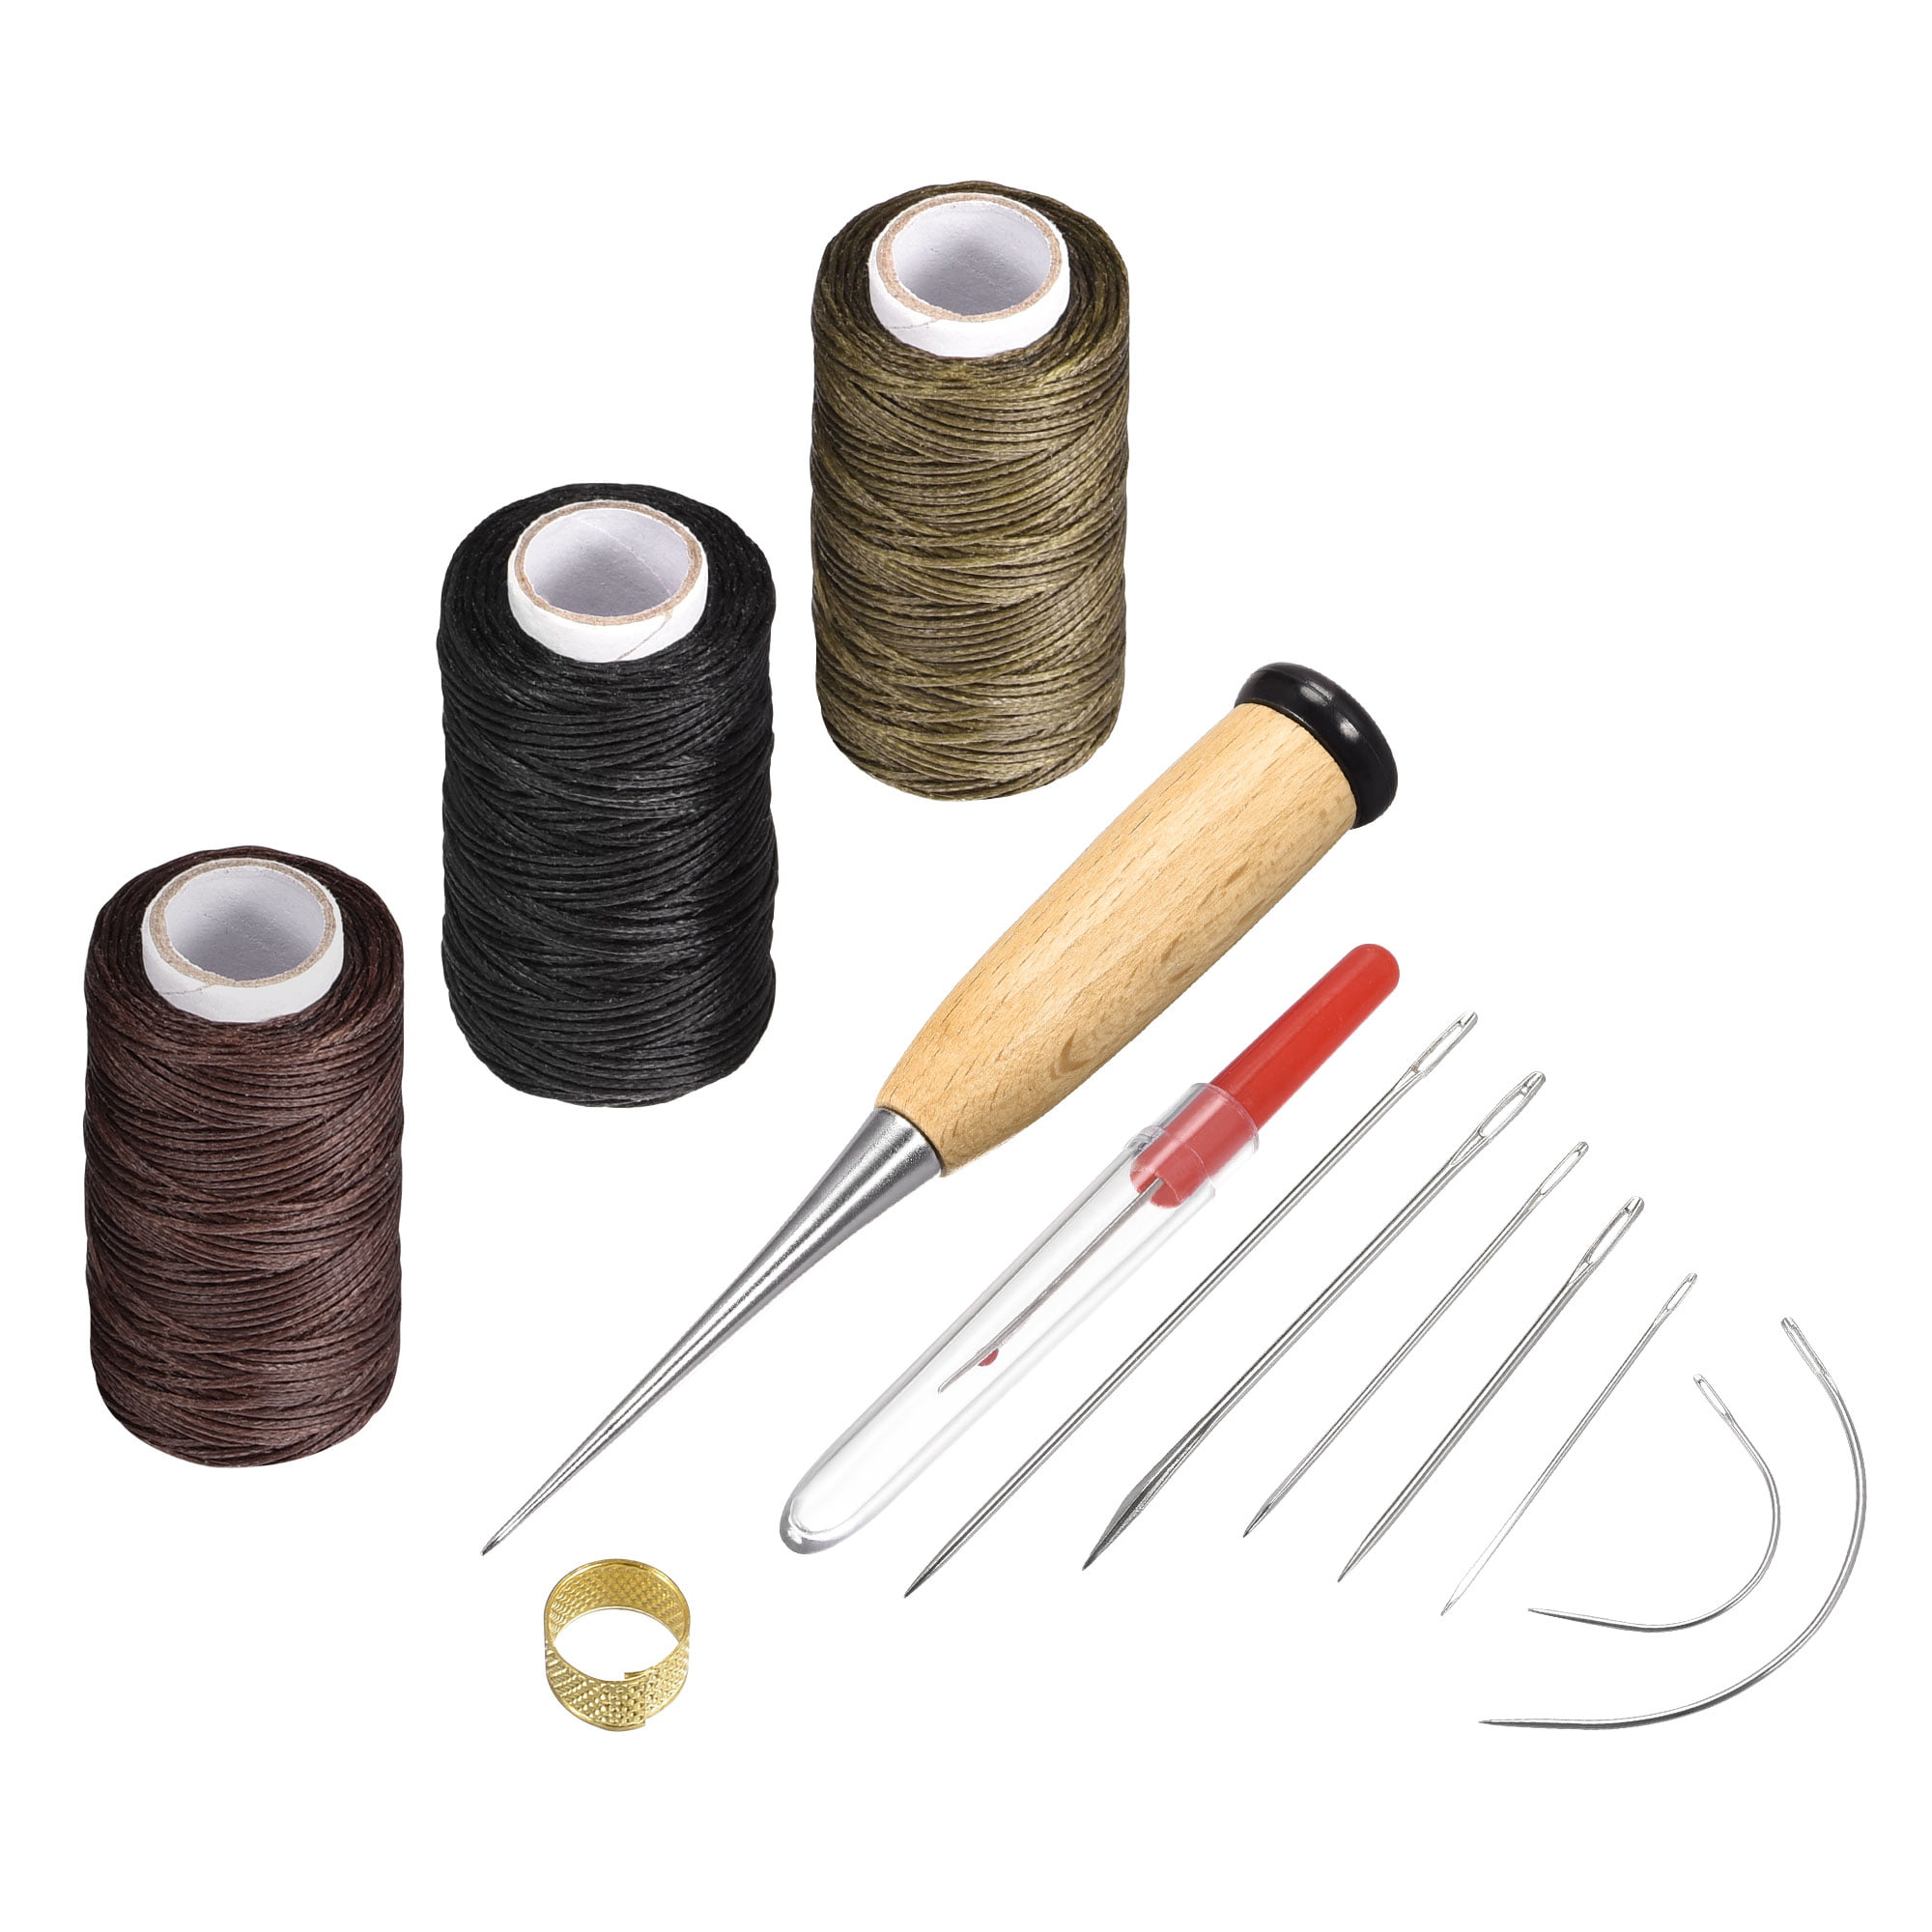 Leather Waxed Thread Stitching Needles Awl Hand Tools Kit for DIY Sewing Craft 